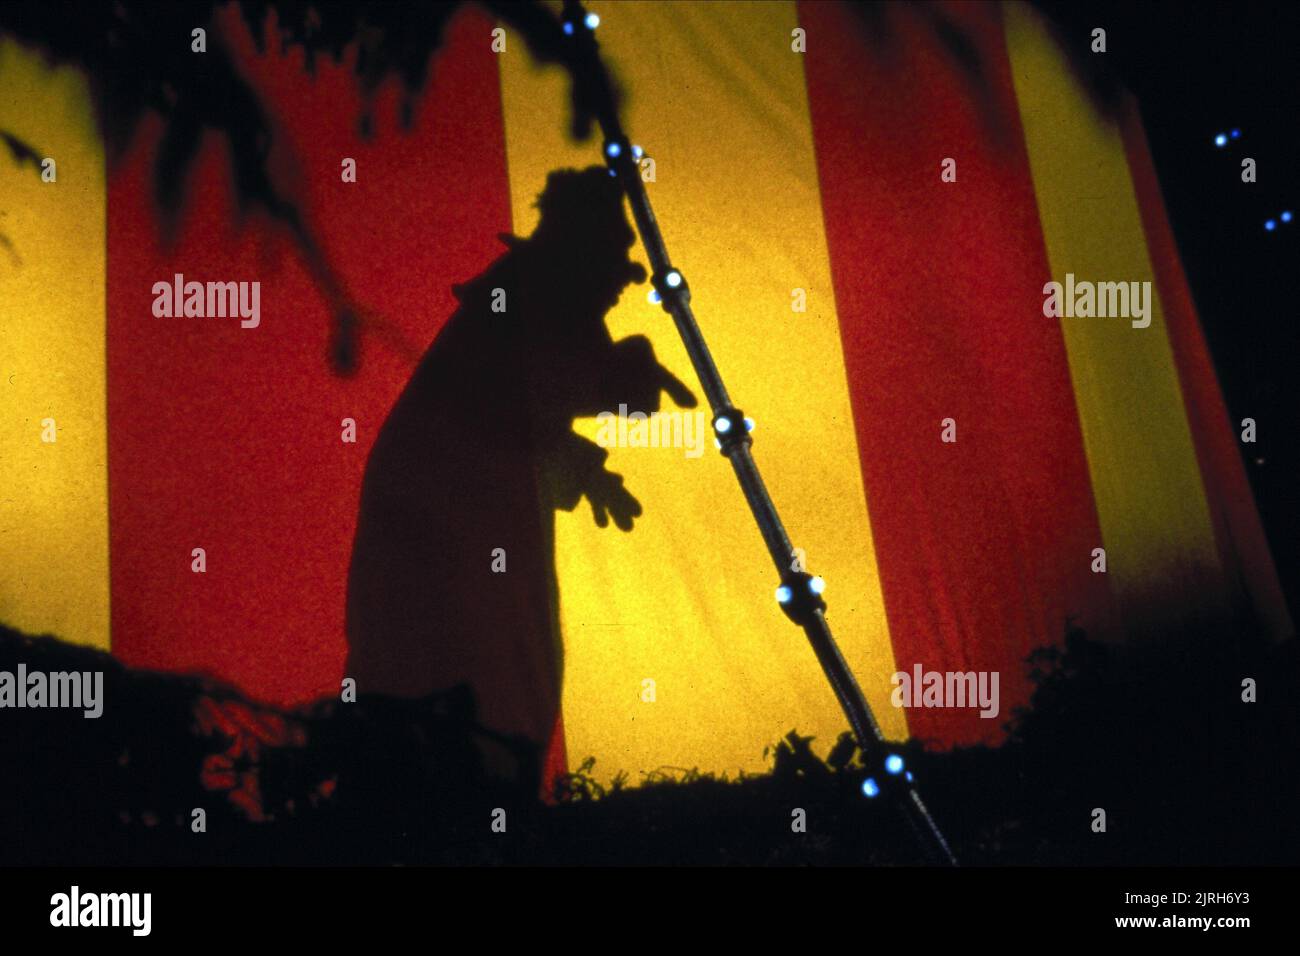 SCARY CLOWN SILHOUETTE, KILLER KLOWNS FROM OUTER SPACE, 1988 Stock Photo